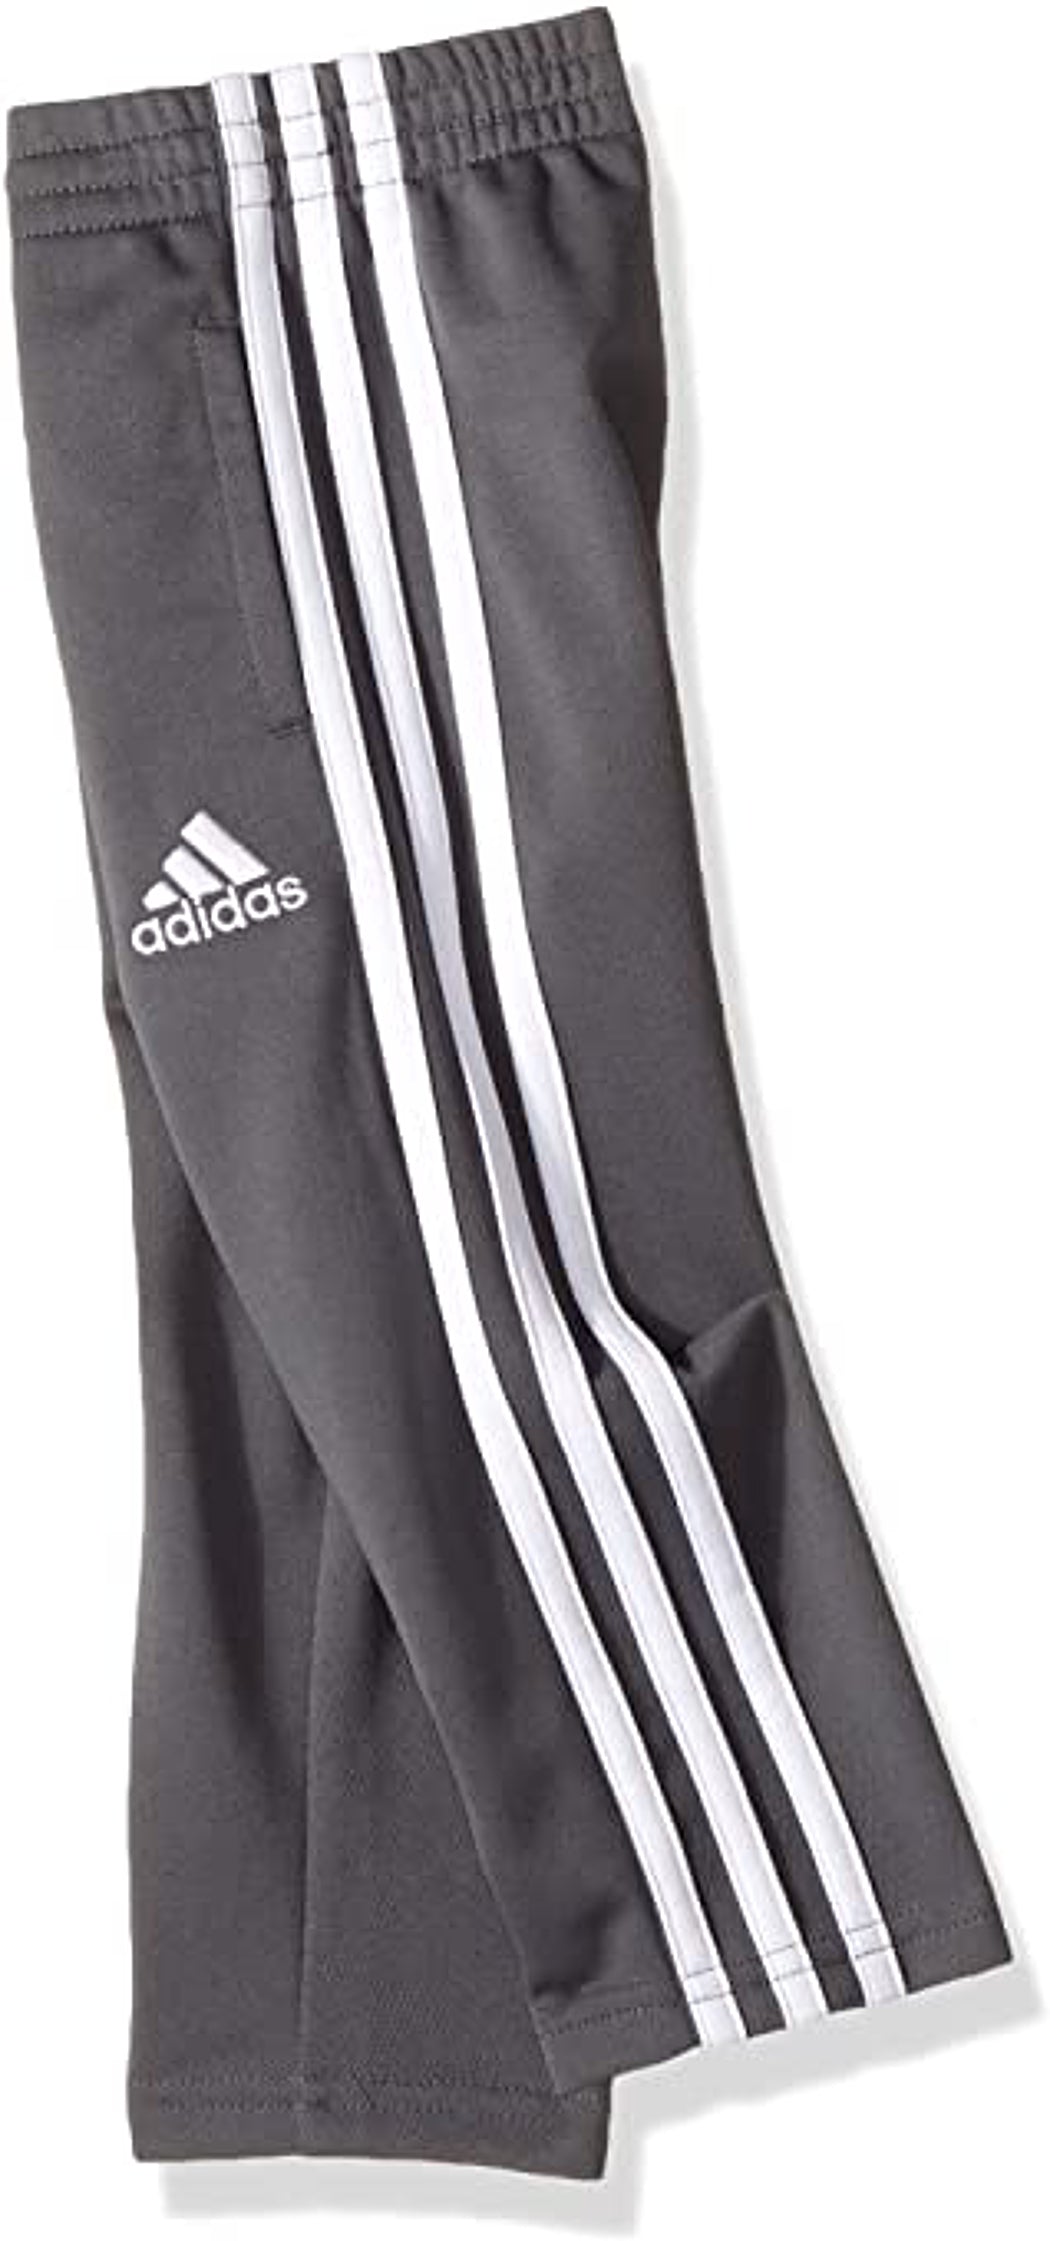 adidas Boys Tapered Trainer Pant